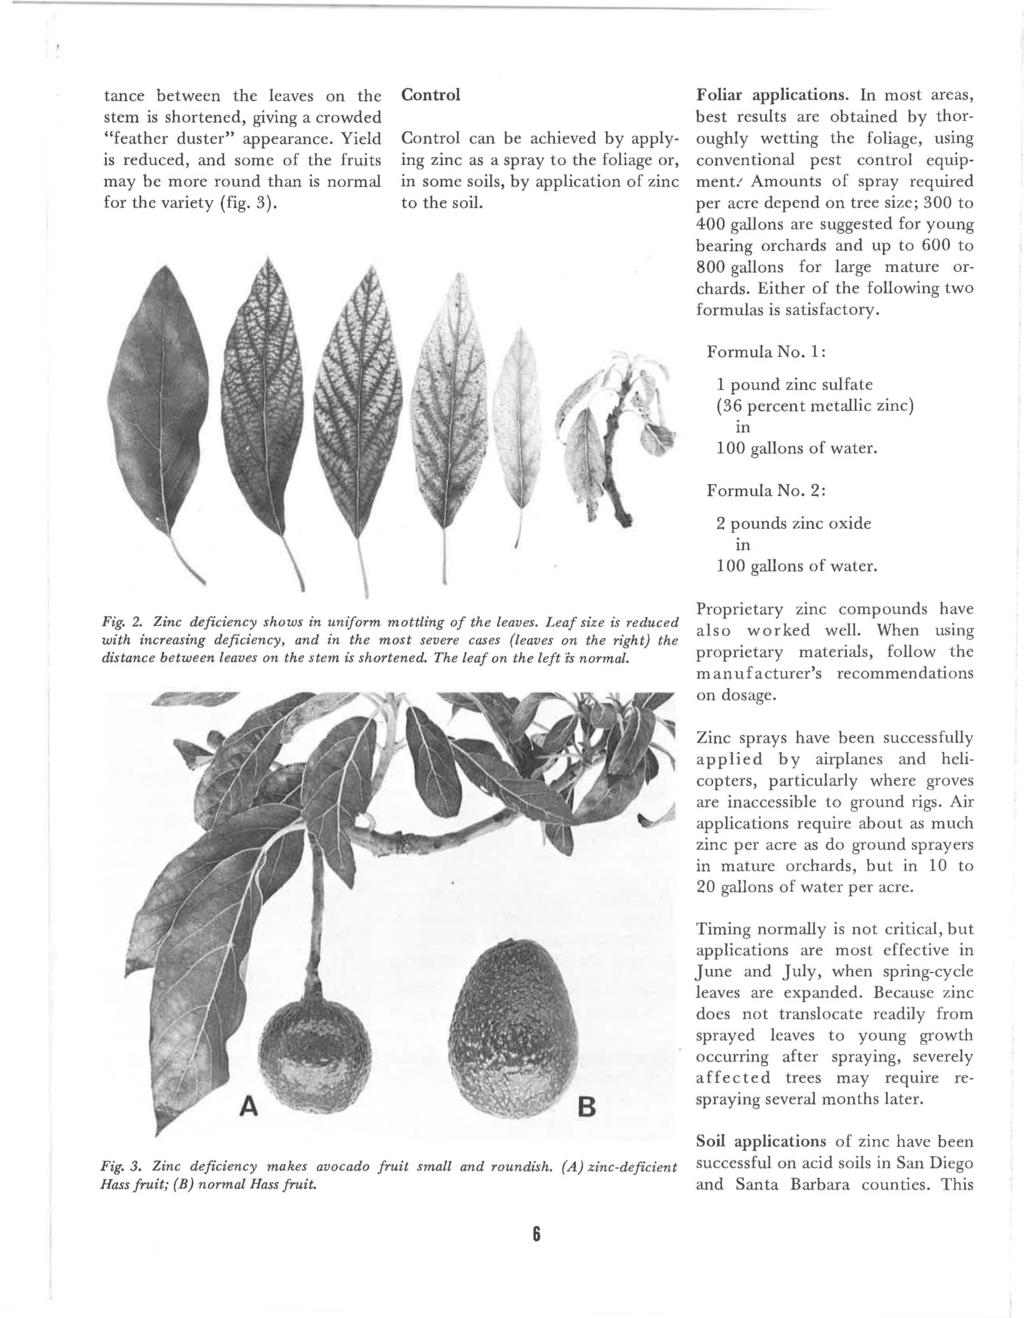 tance between the leaves on the stem is shortened, giving a crowded "feather duster" appearance. Yield is reduced, and some of the fruits may be more round than is normal for the variety (fig. 3).